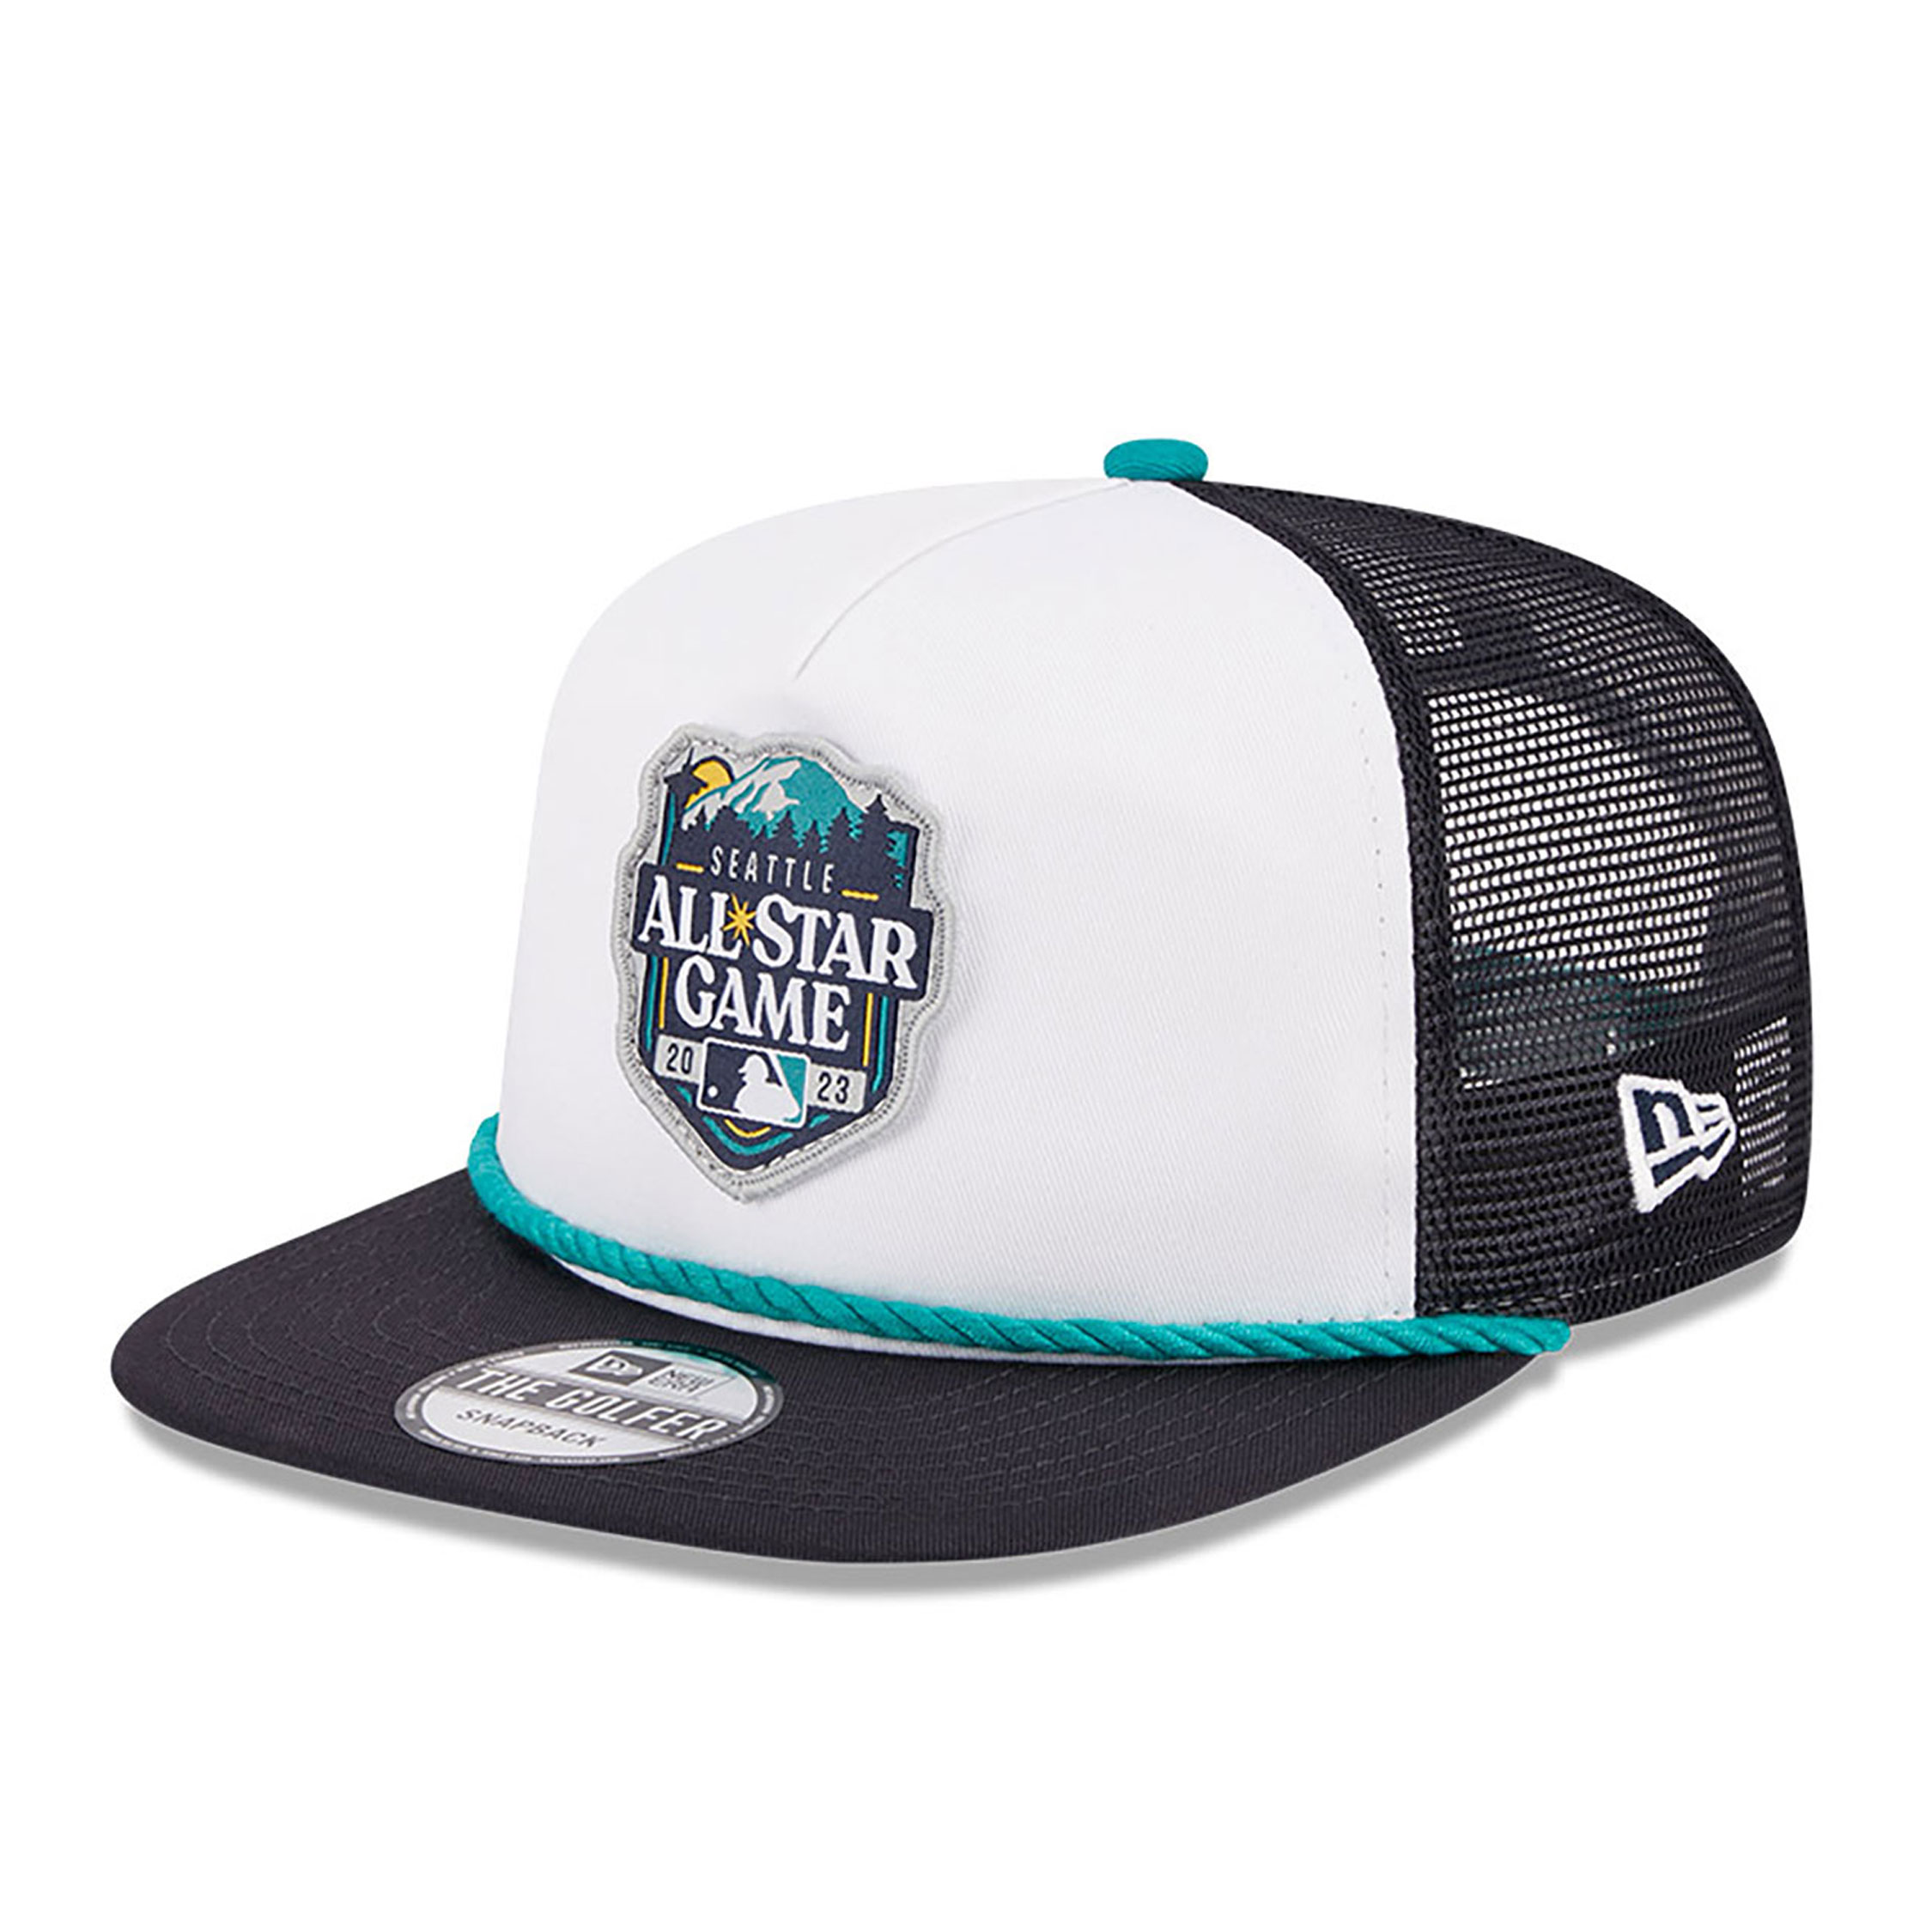 2019 mlb all star game hats